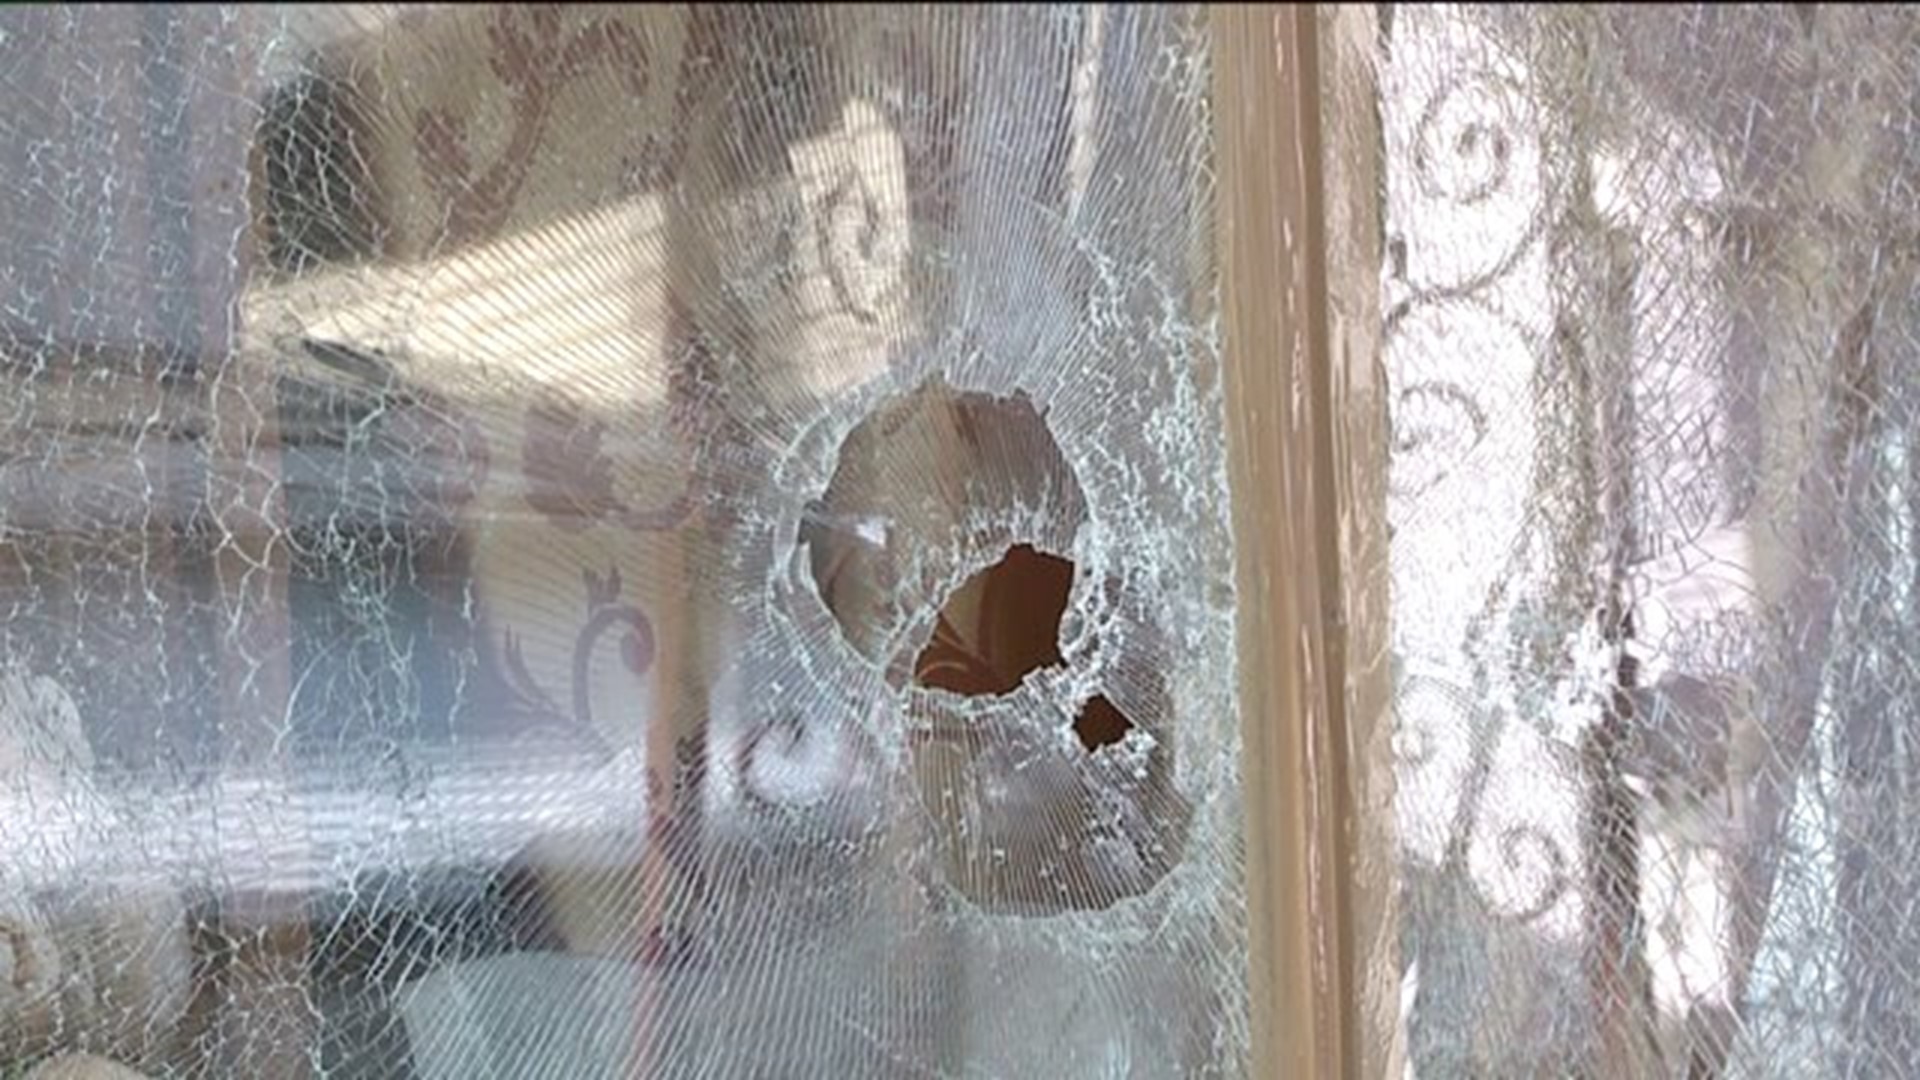 Shots Fired at a Home in Wilkes-Barre